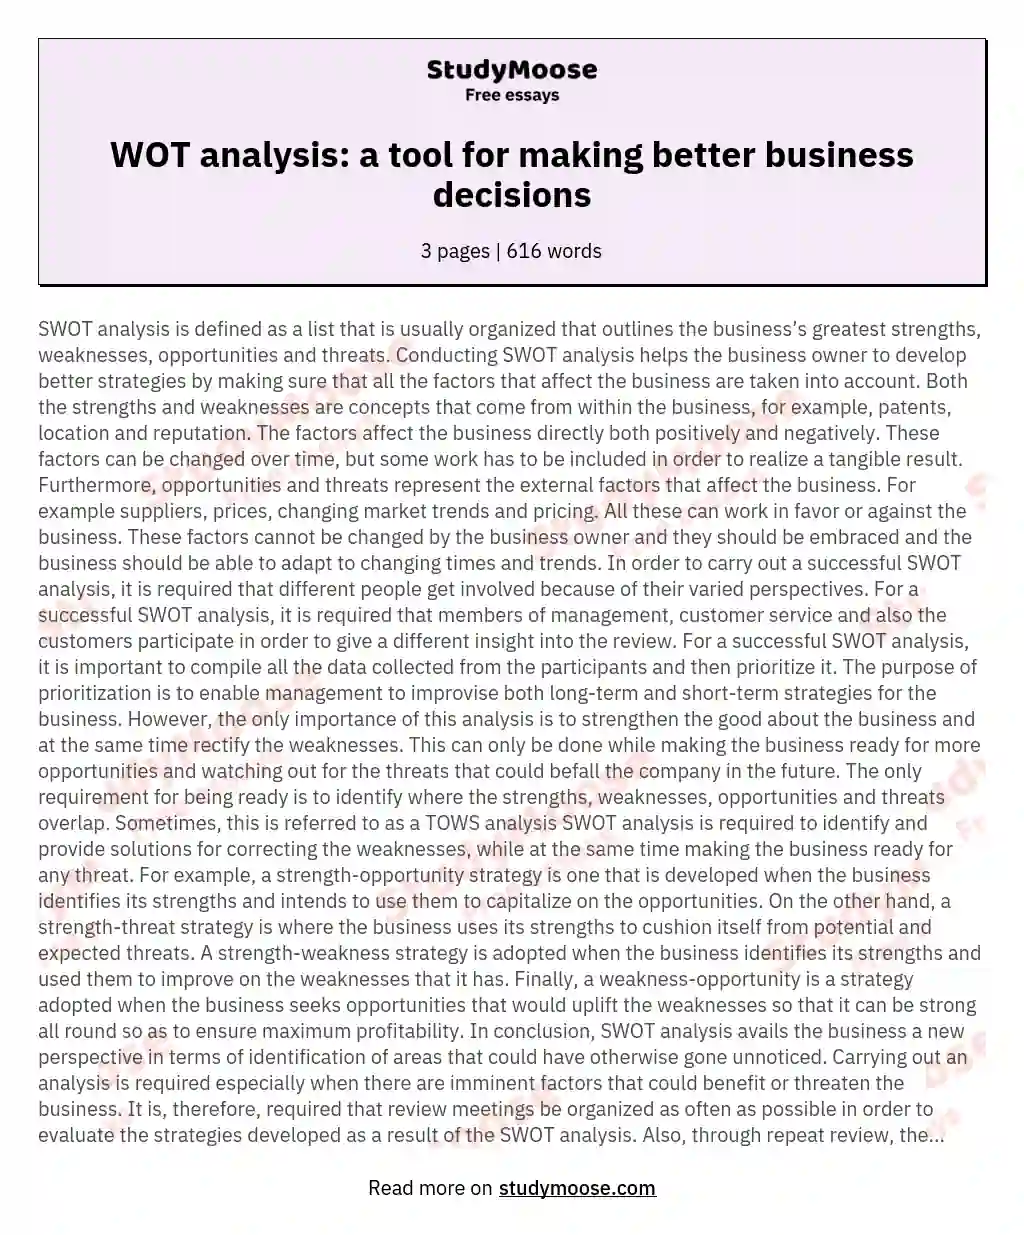 WOT analysis: a tool for making better business decisions essay